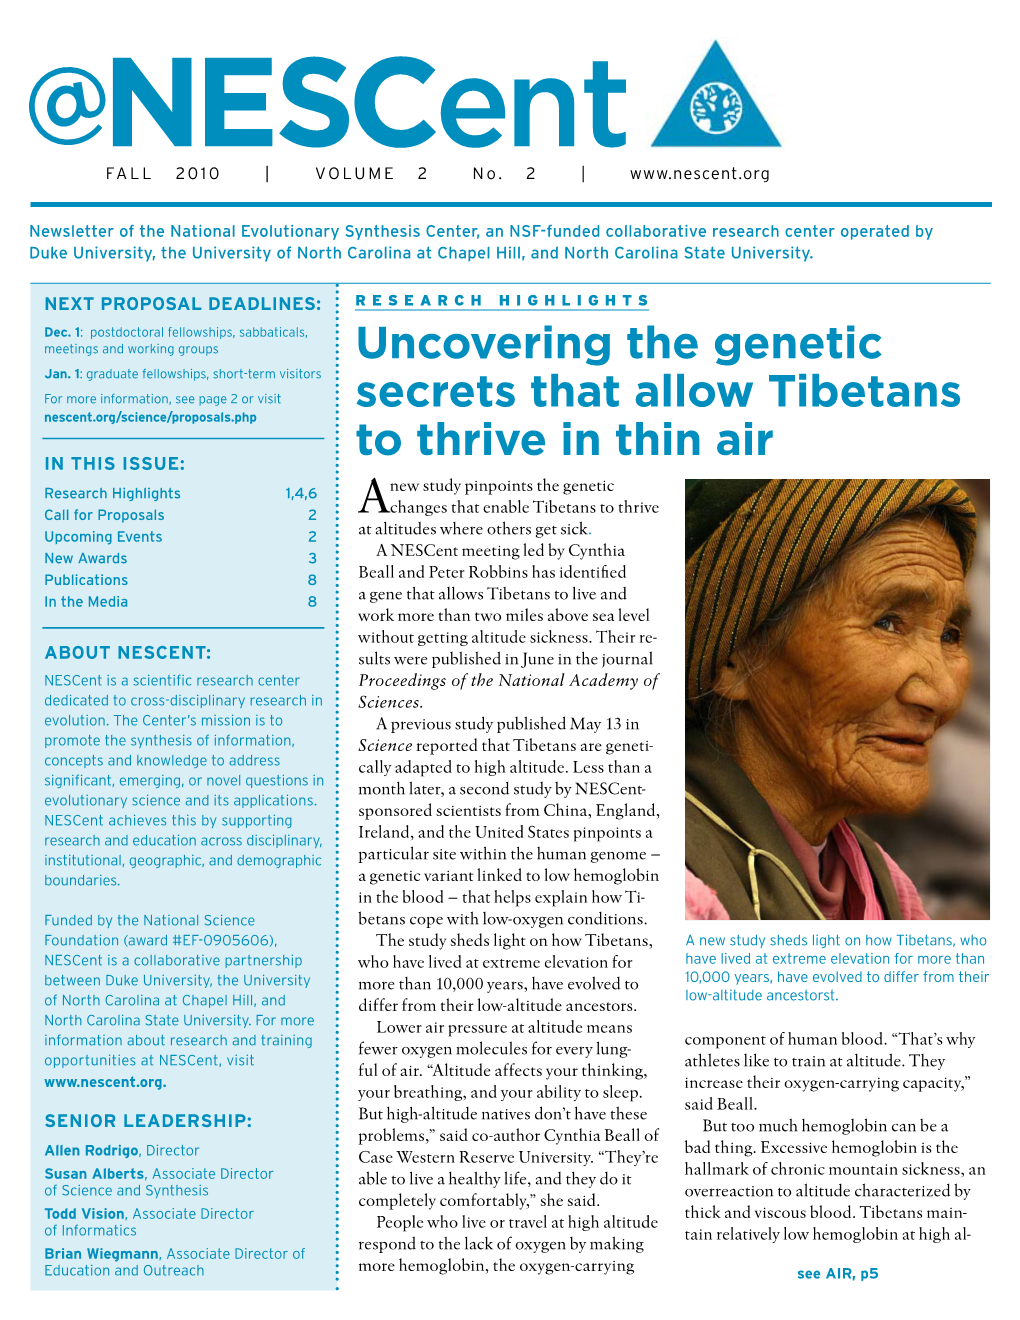 Uncovering the Genetic Secrets That Allow Tibetans to Thrive in Thin